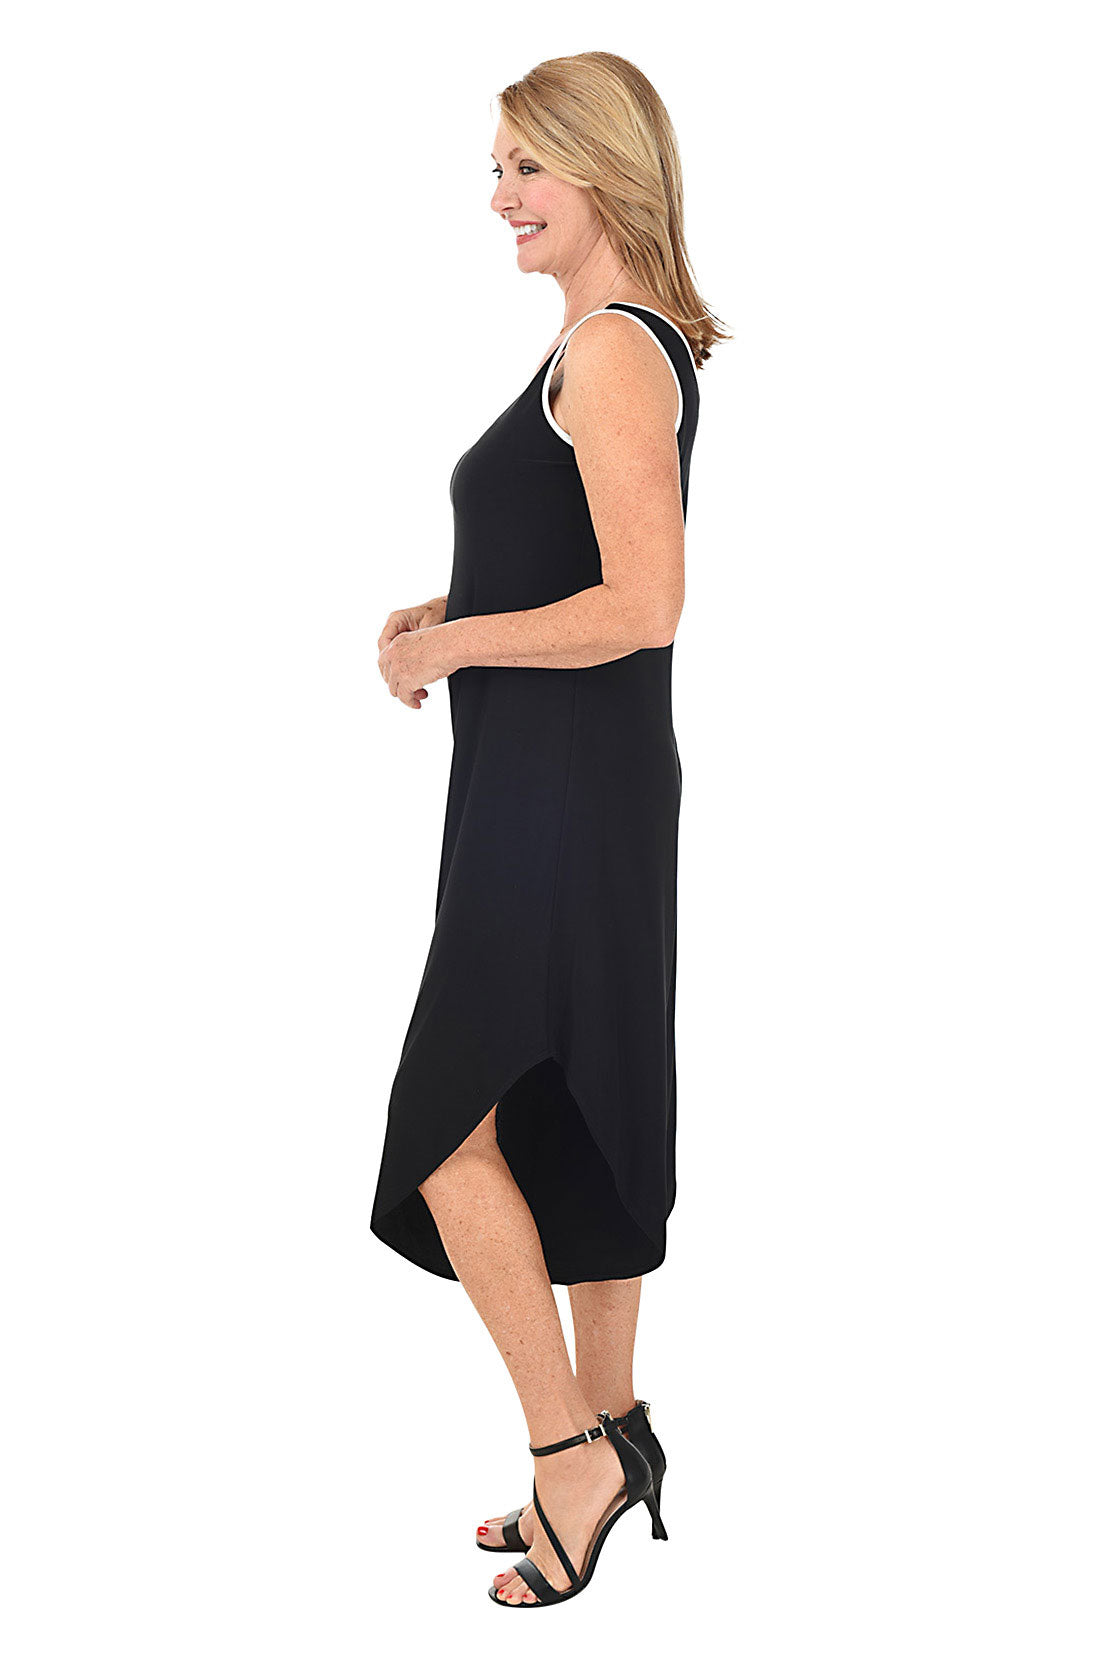 Contrast Piping Sleeveless Wide Leg Jumpsuit